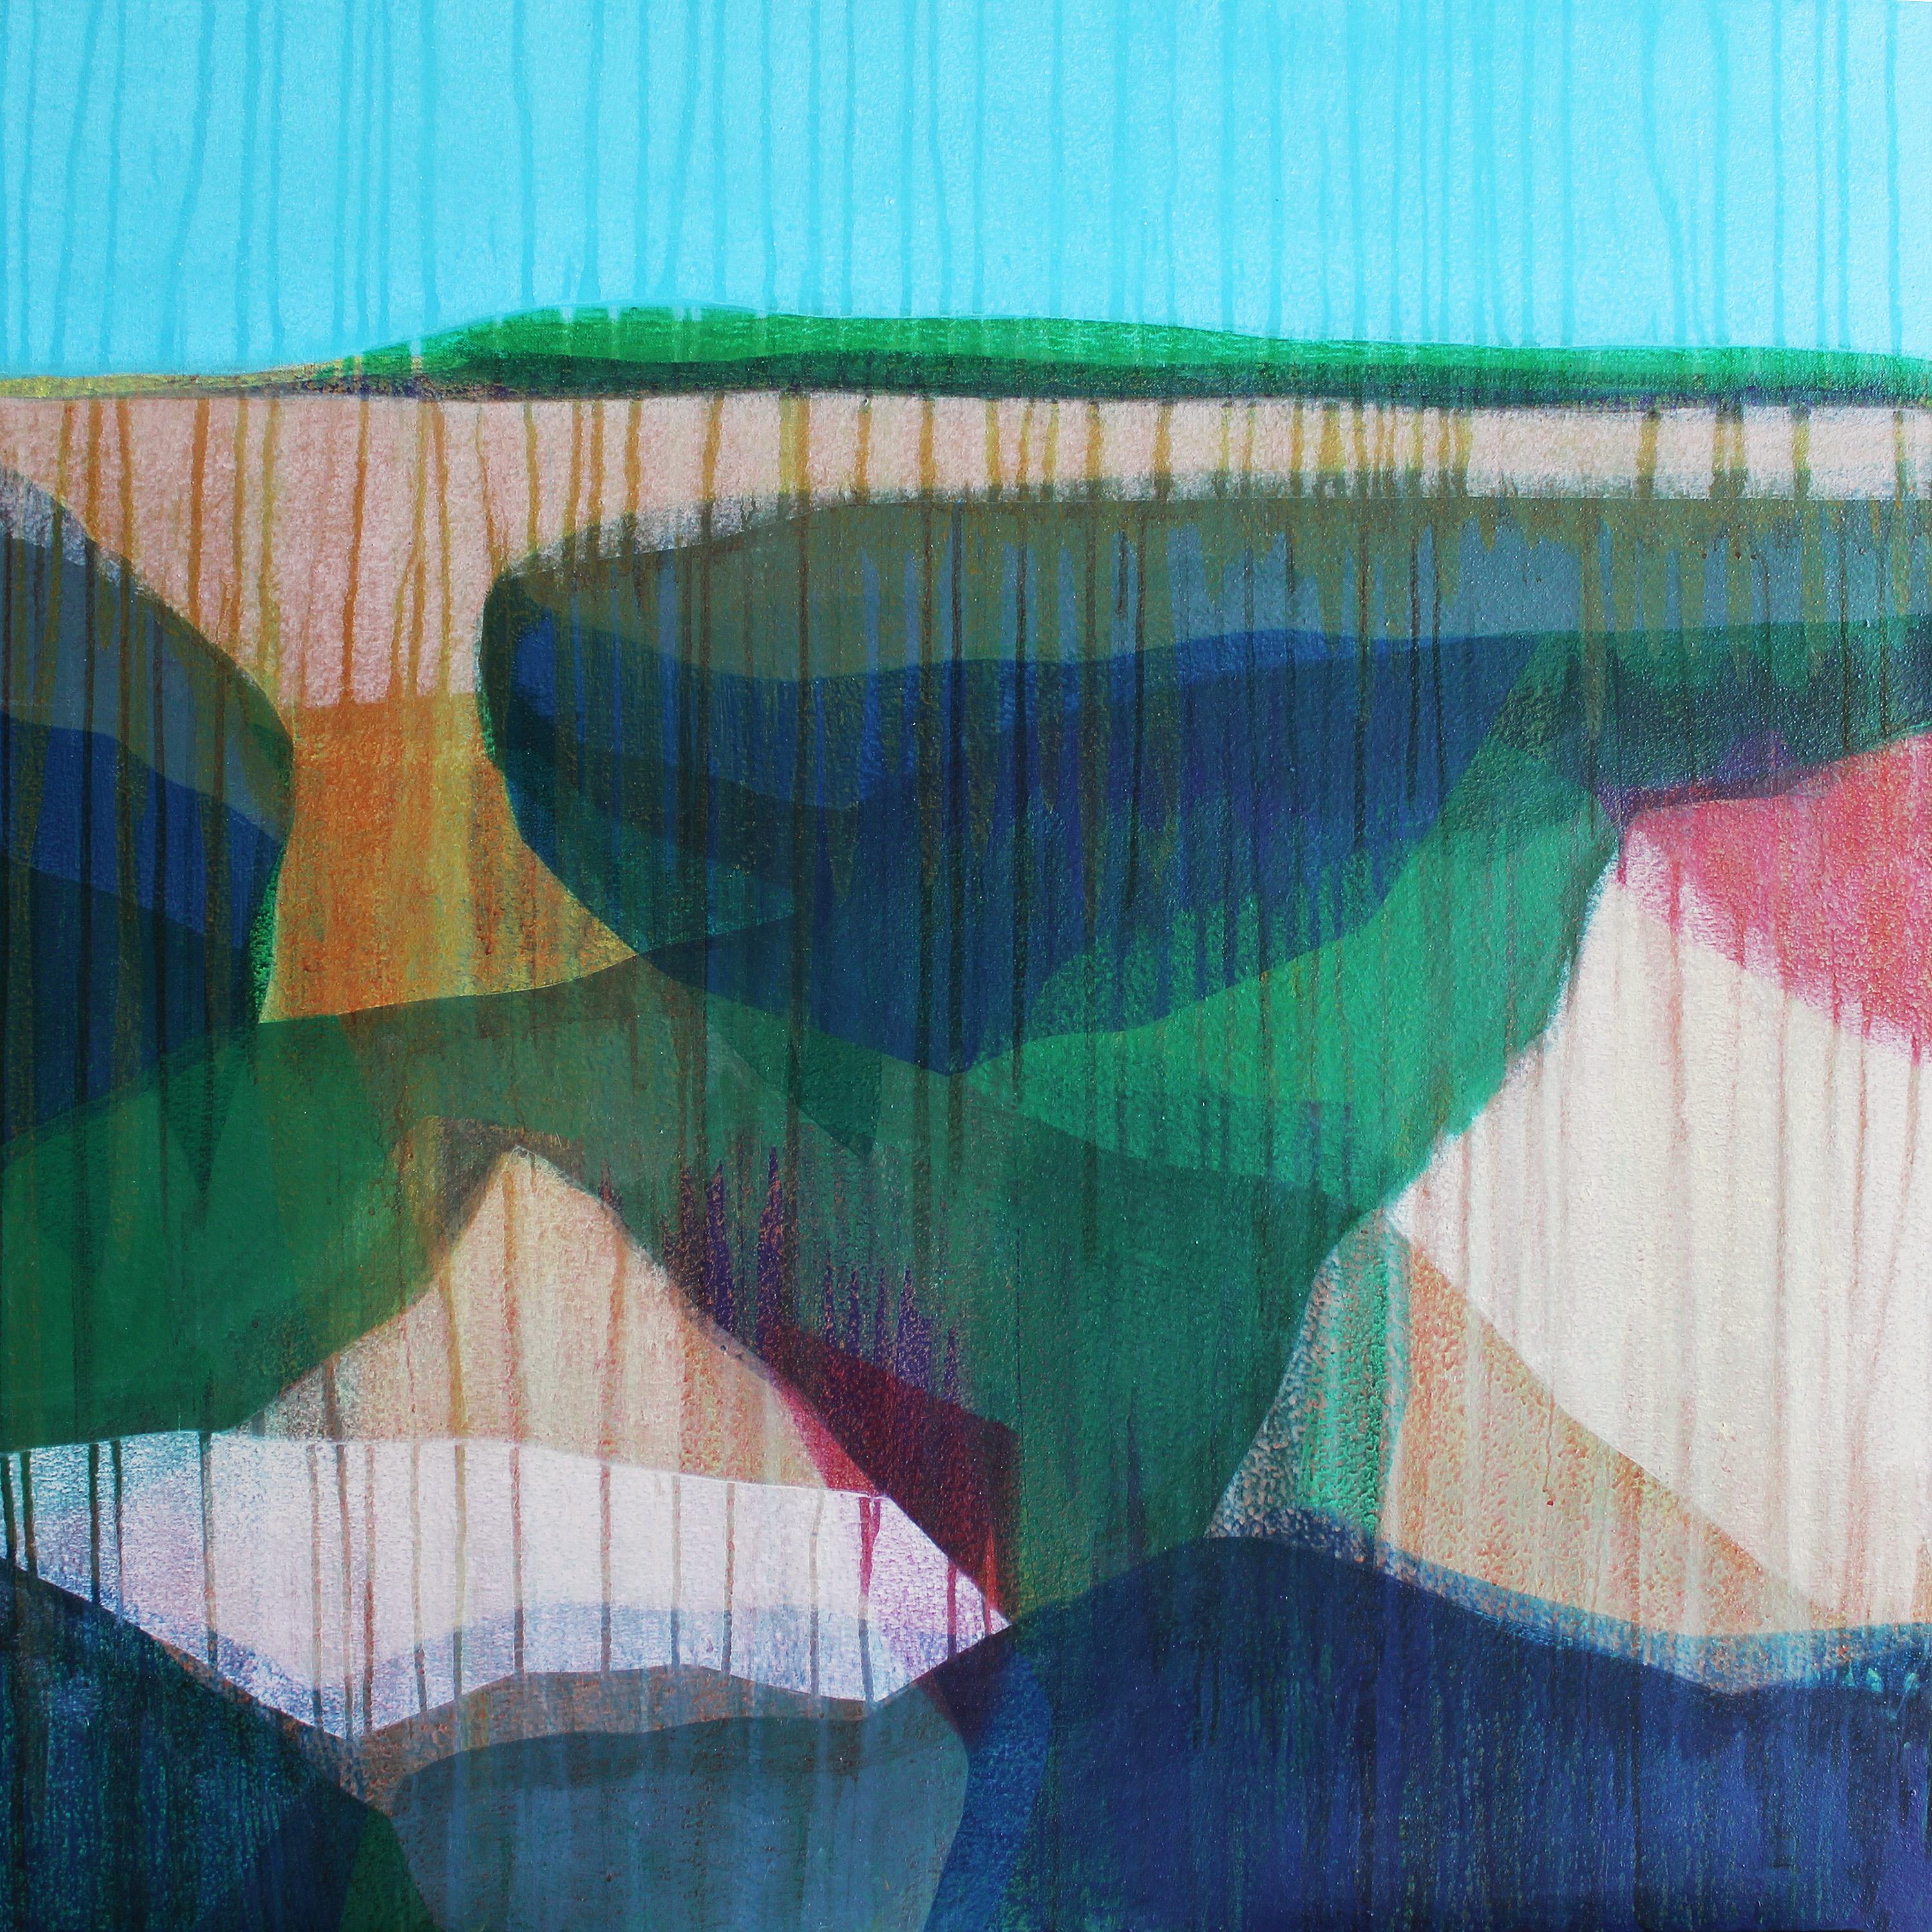 "(Jubilee) Marshscape No. 1" is an abstract landscape painting featuring hues of blue, green, magenta, orange and yellow.

Katherine Sandoz is inspired by the work of Helen Frankenthaler, Richard Diebenkorn, Morris Louis, Vincent Van Gogh, Willem de